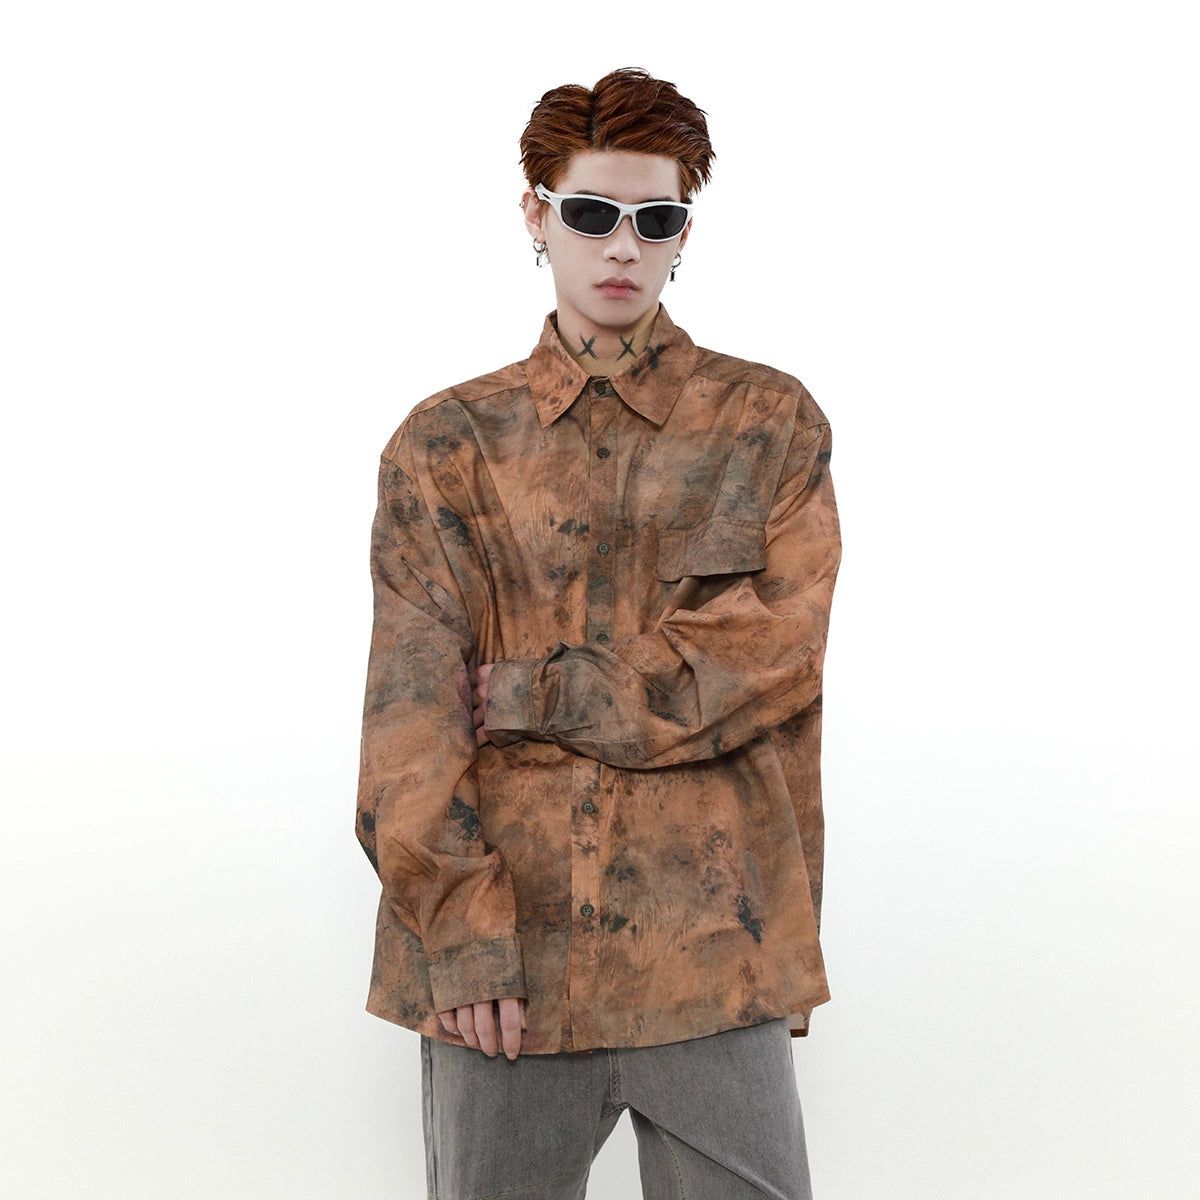 Retro Painted Long Sleeve Shirt Korean Street Fashion Shirt By Mr Nearly Shop Online at OH Vault